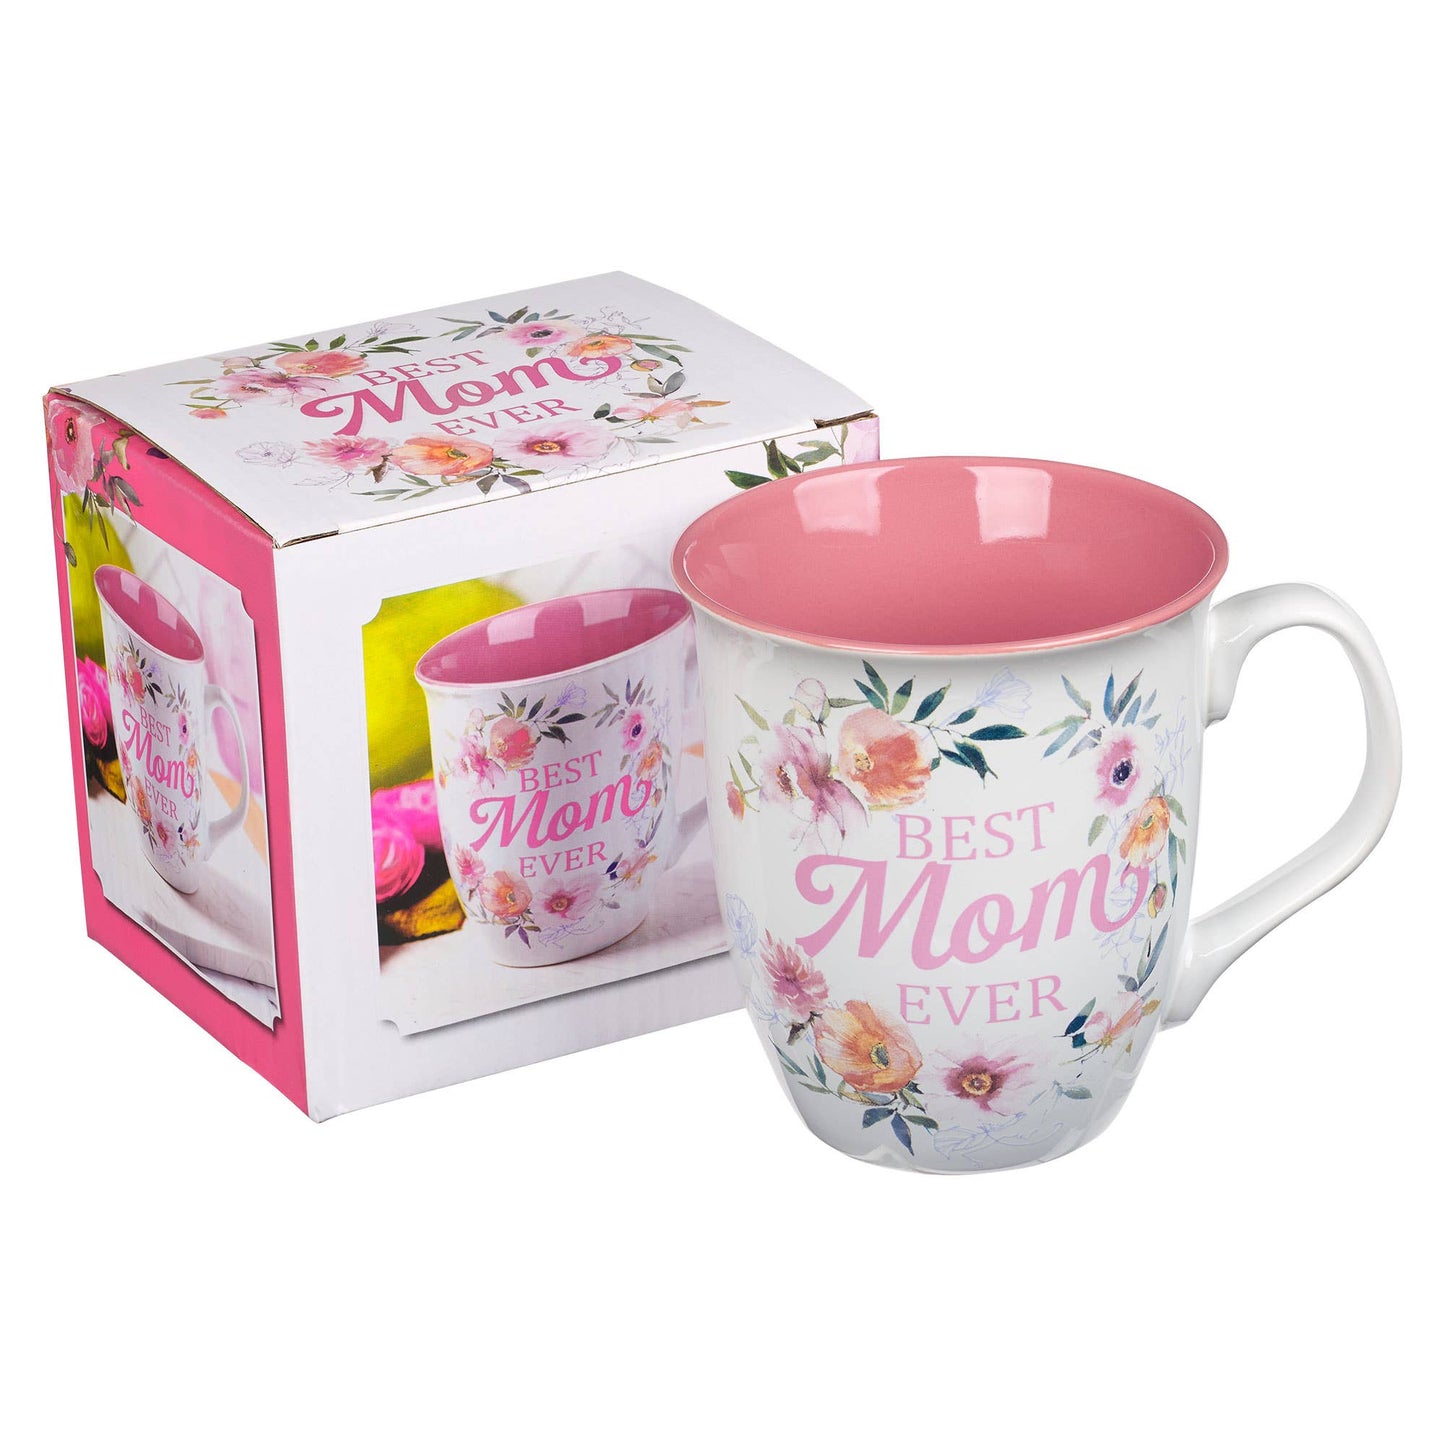 Best Mom Ever White and Pink Coffee Mug - Numbers 6:24